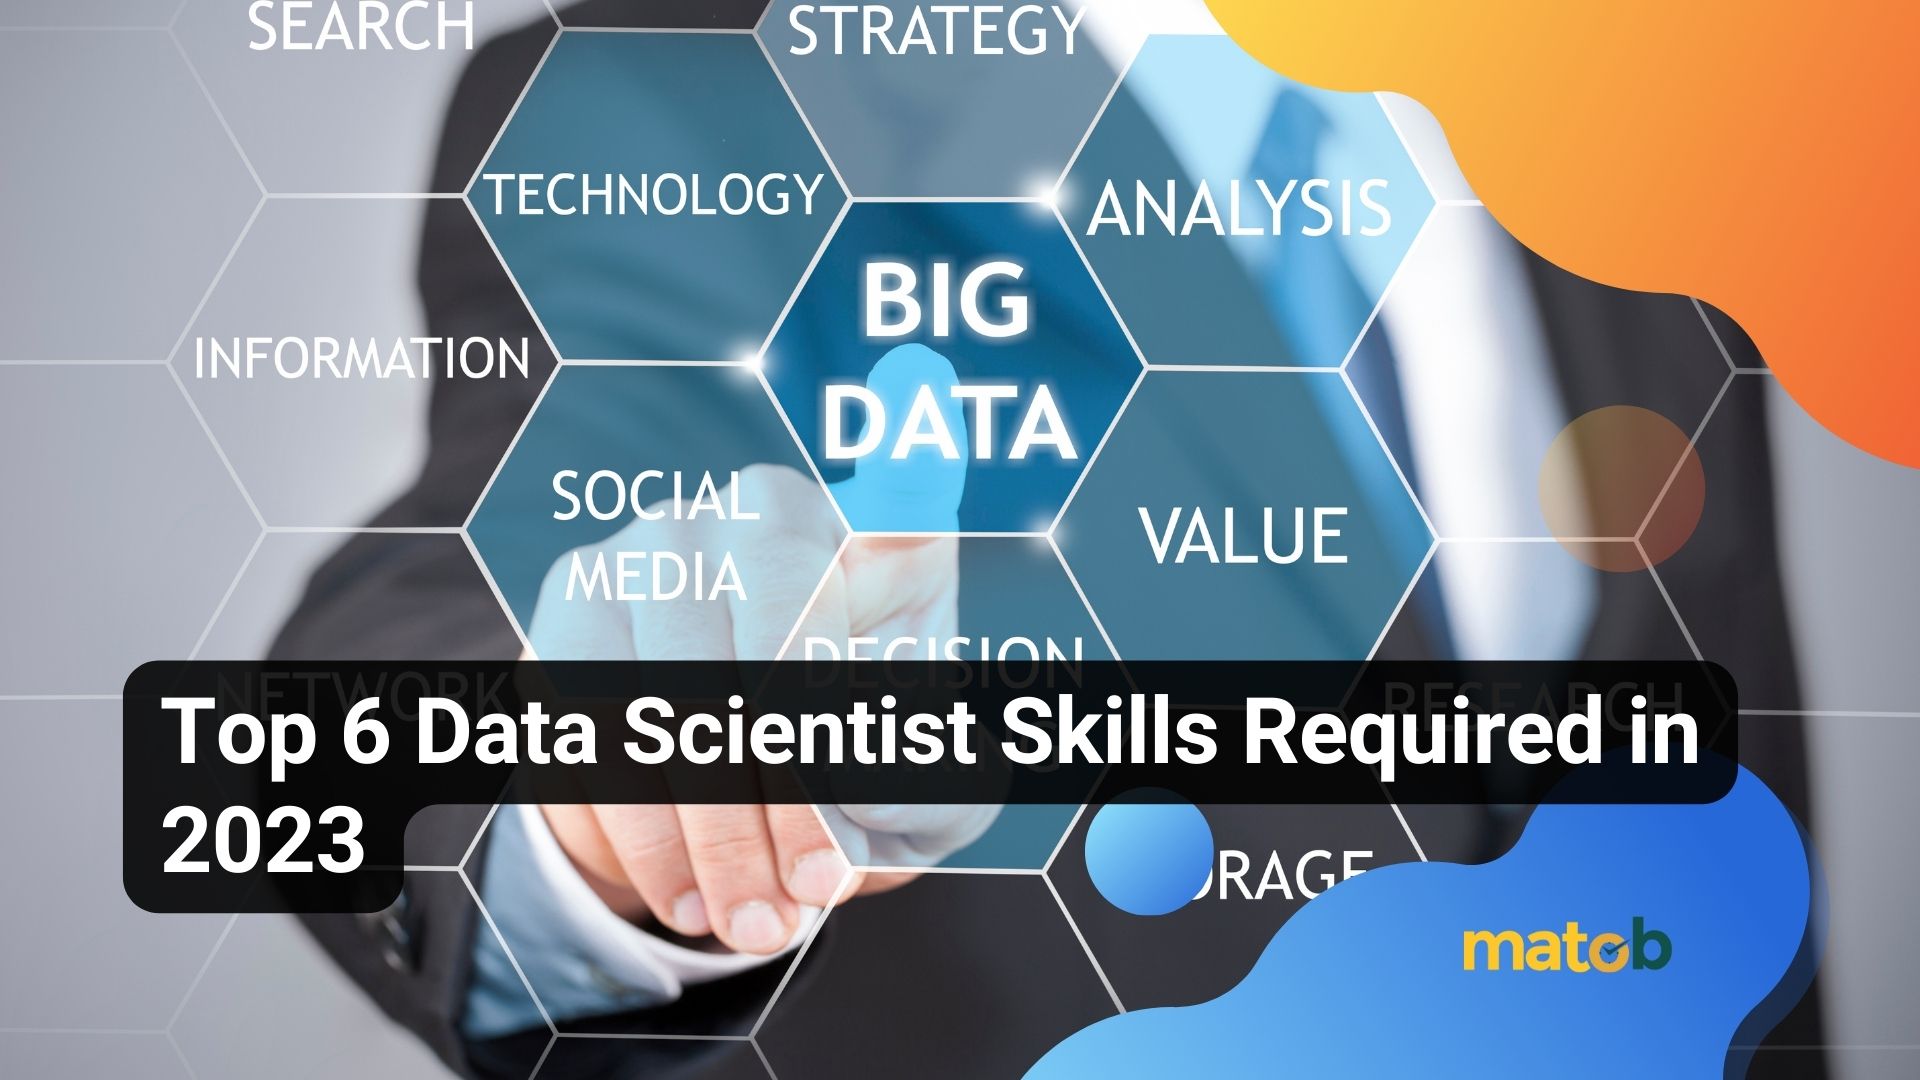 Top 6 Data Scientist Skills Required in 2023